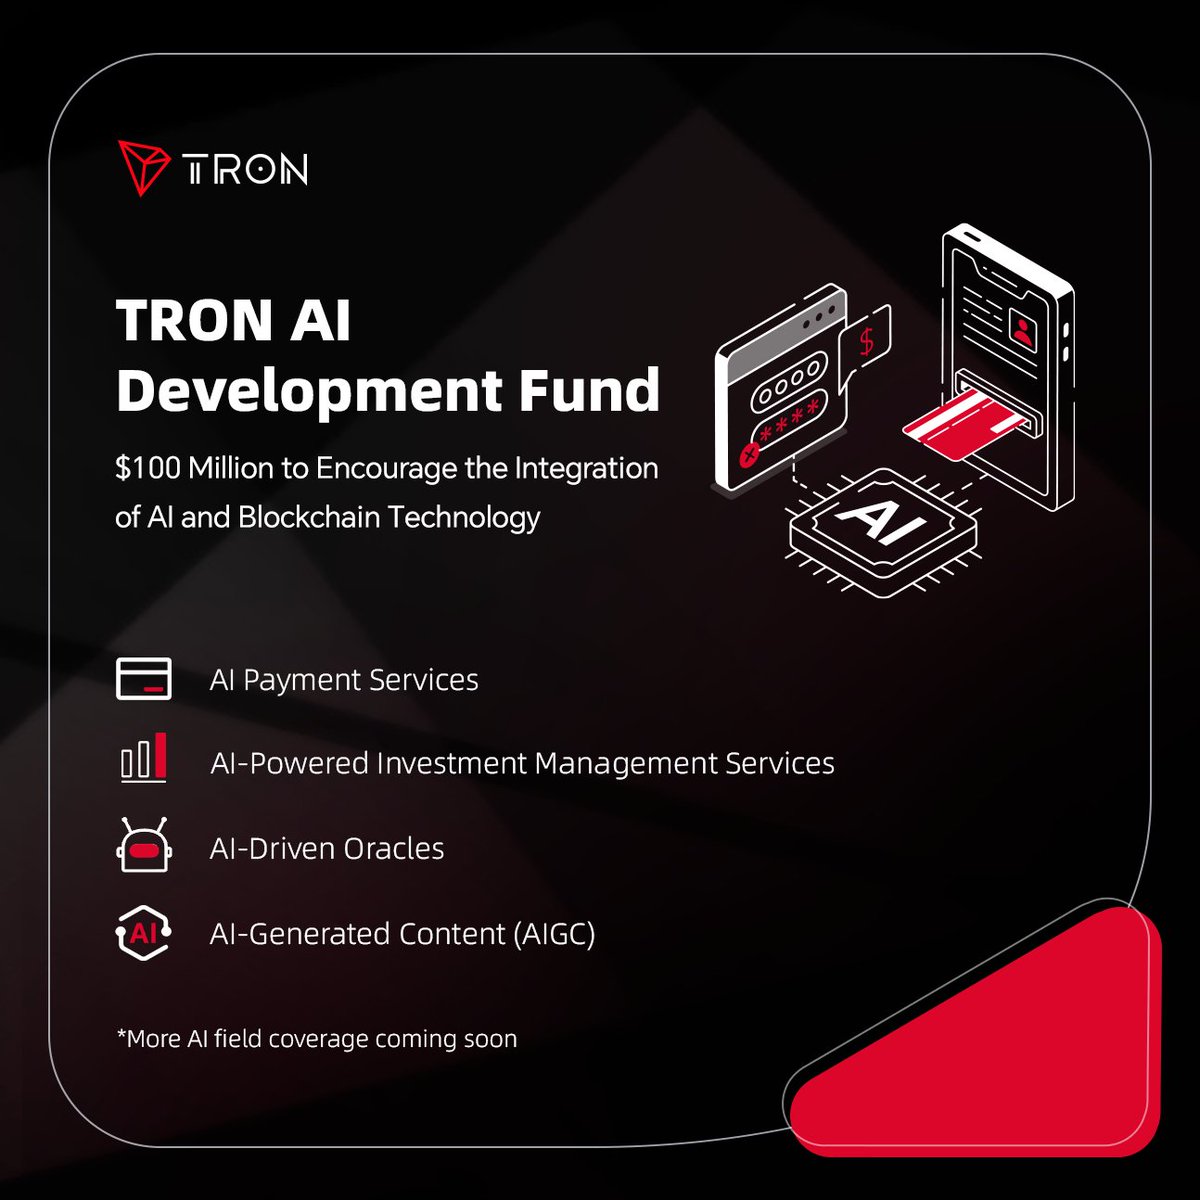 The future is here, #TRONICS! 🚀

The TRON AI Development Fund, launched in February 2023 with $100M, is revolutionizing the integration of #AI and #Blockchain. 
🤖 x ⛓️

Check it out 👇